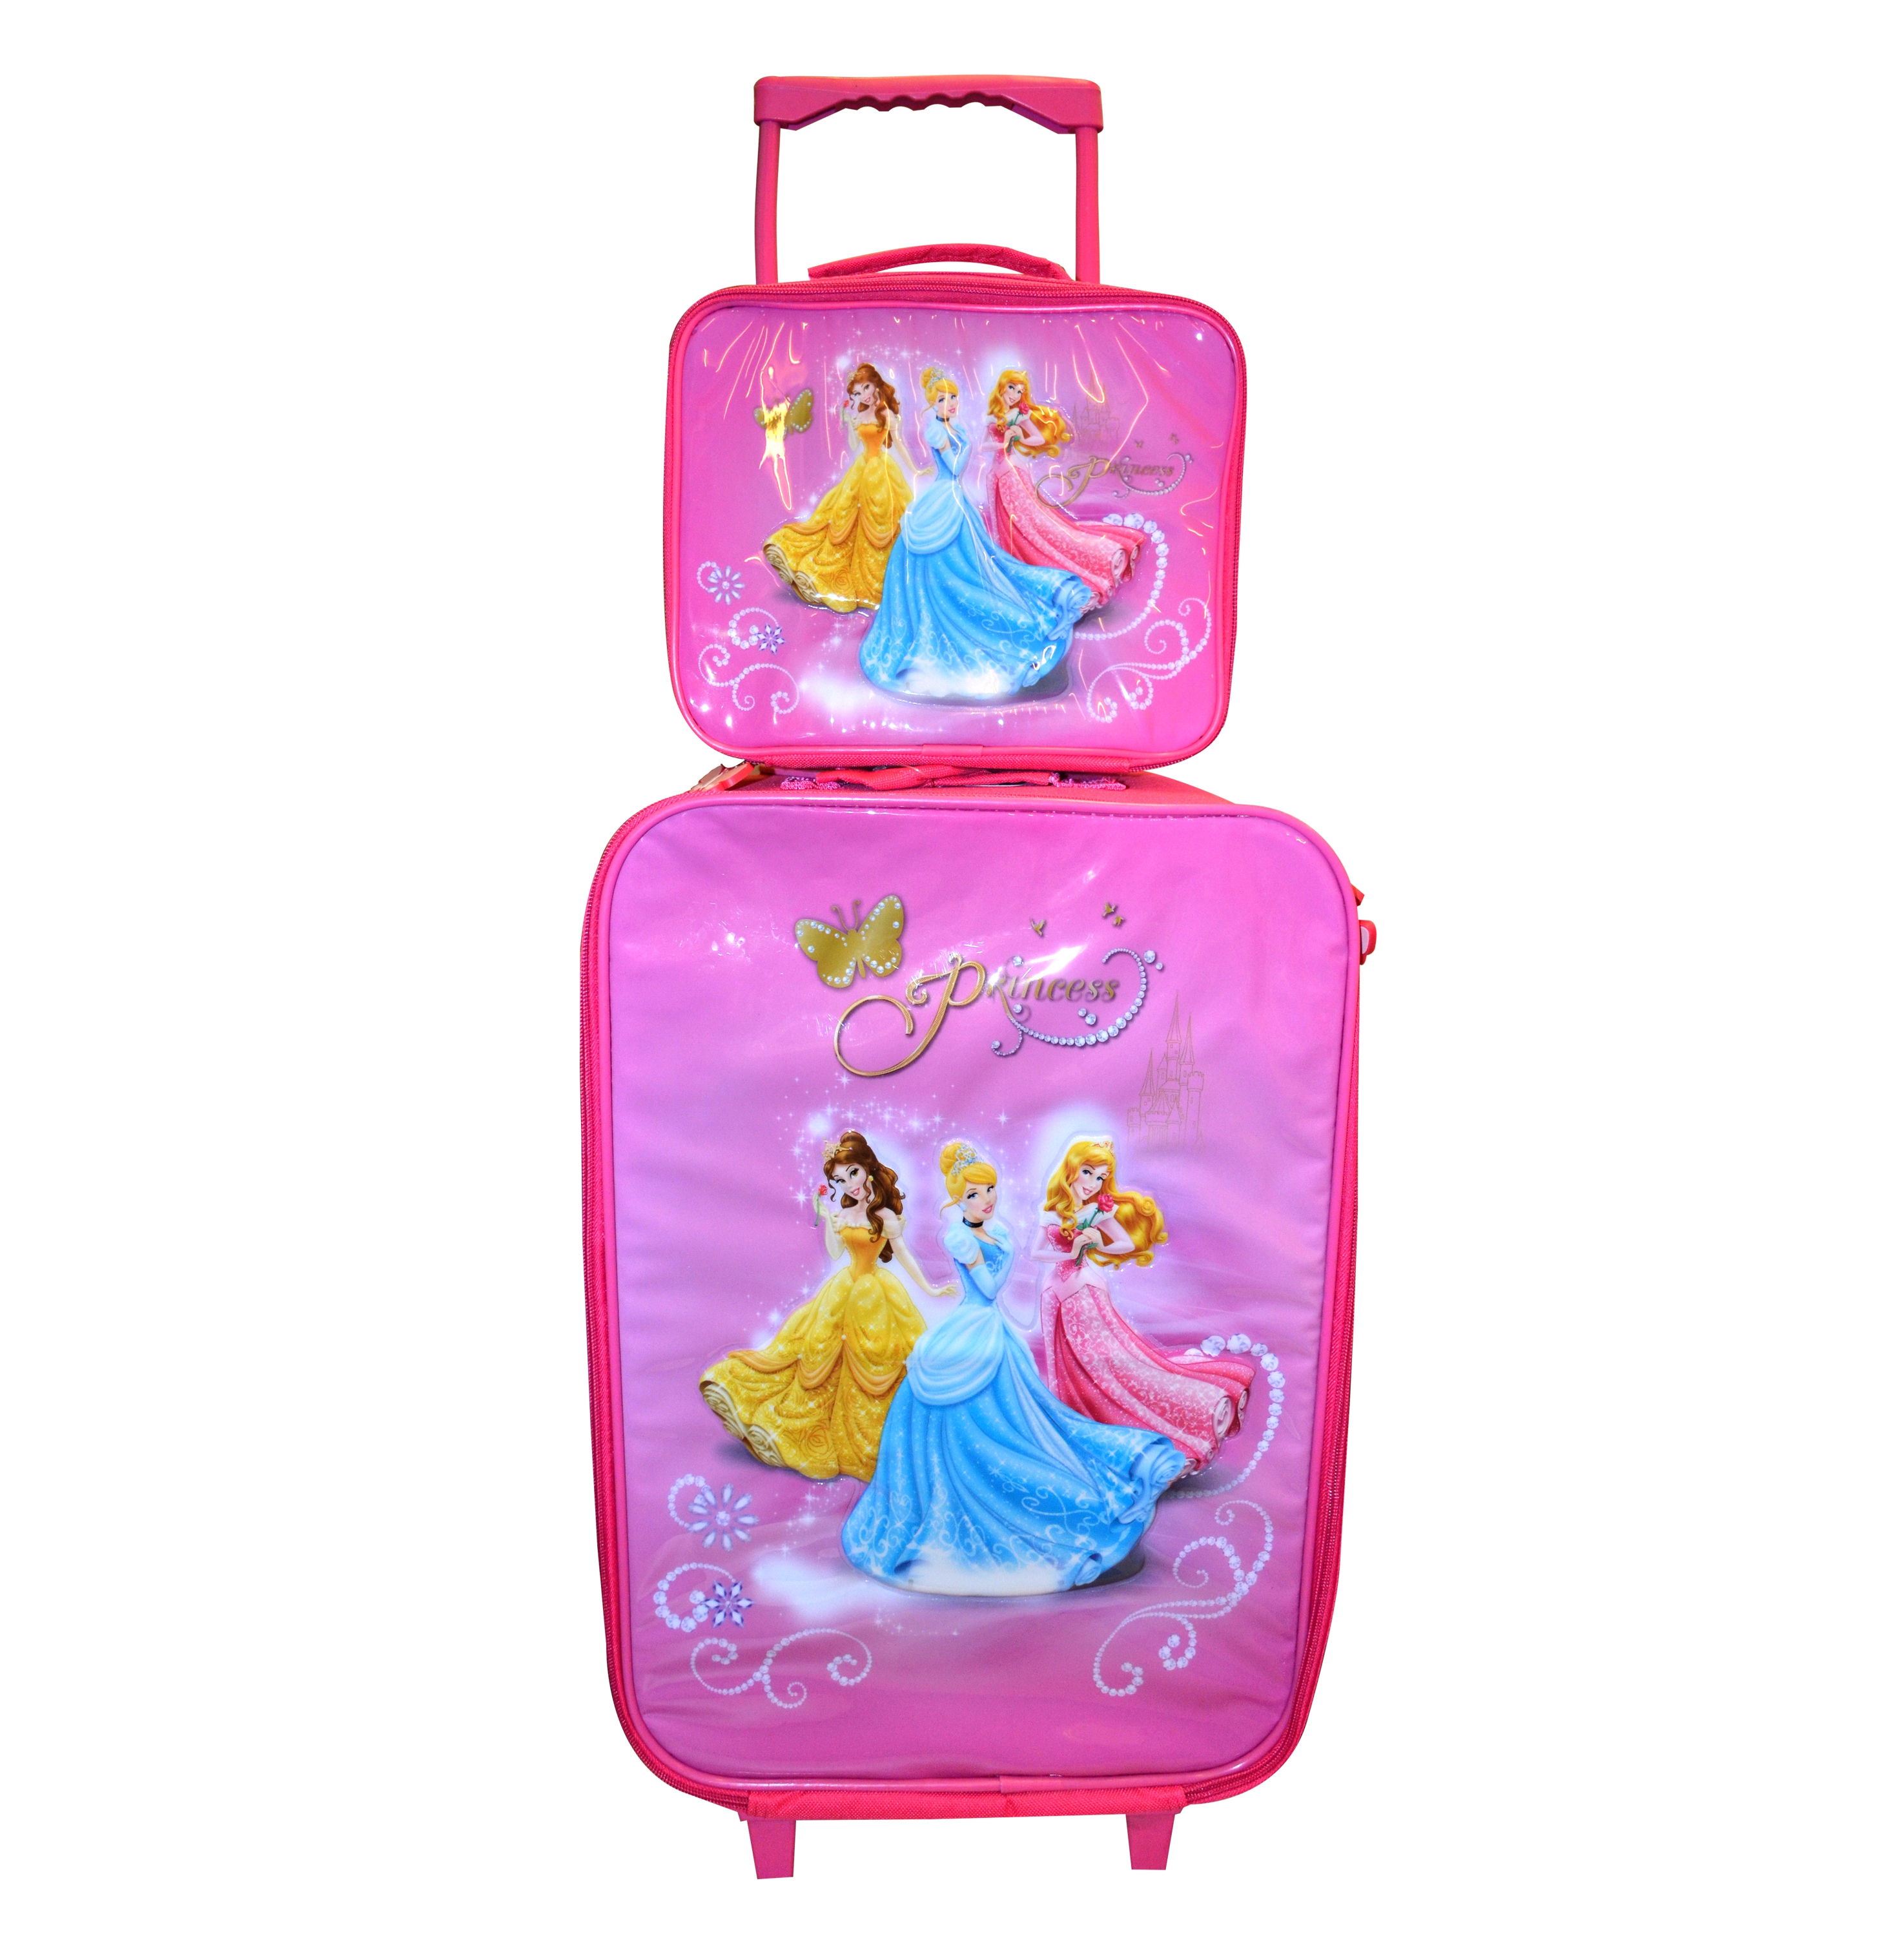 Disney 'Princess & Friends' 2 Piece Suitcase with Lunch Bag Luggage Set